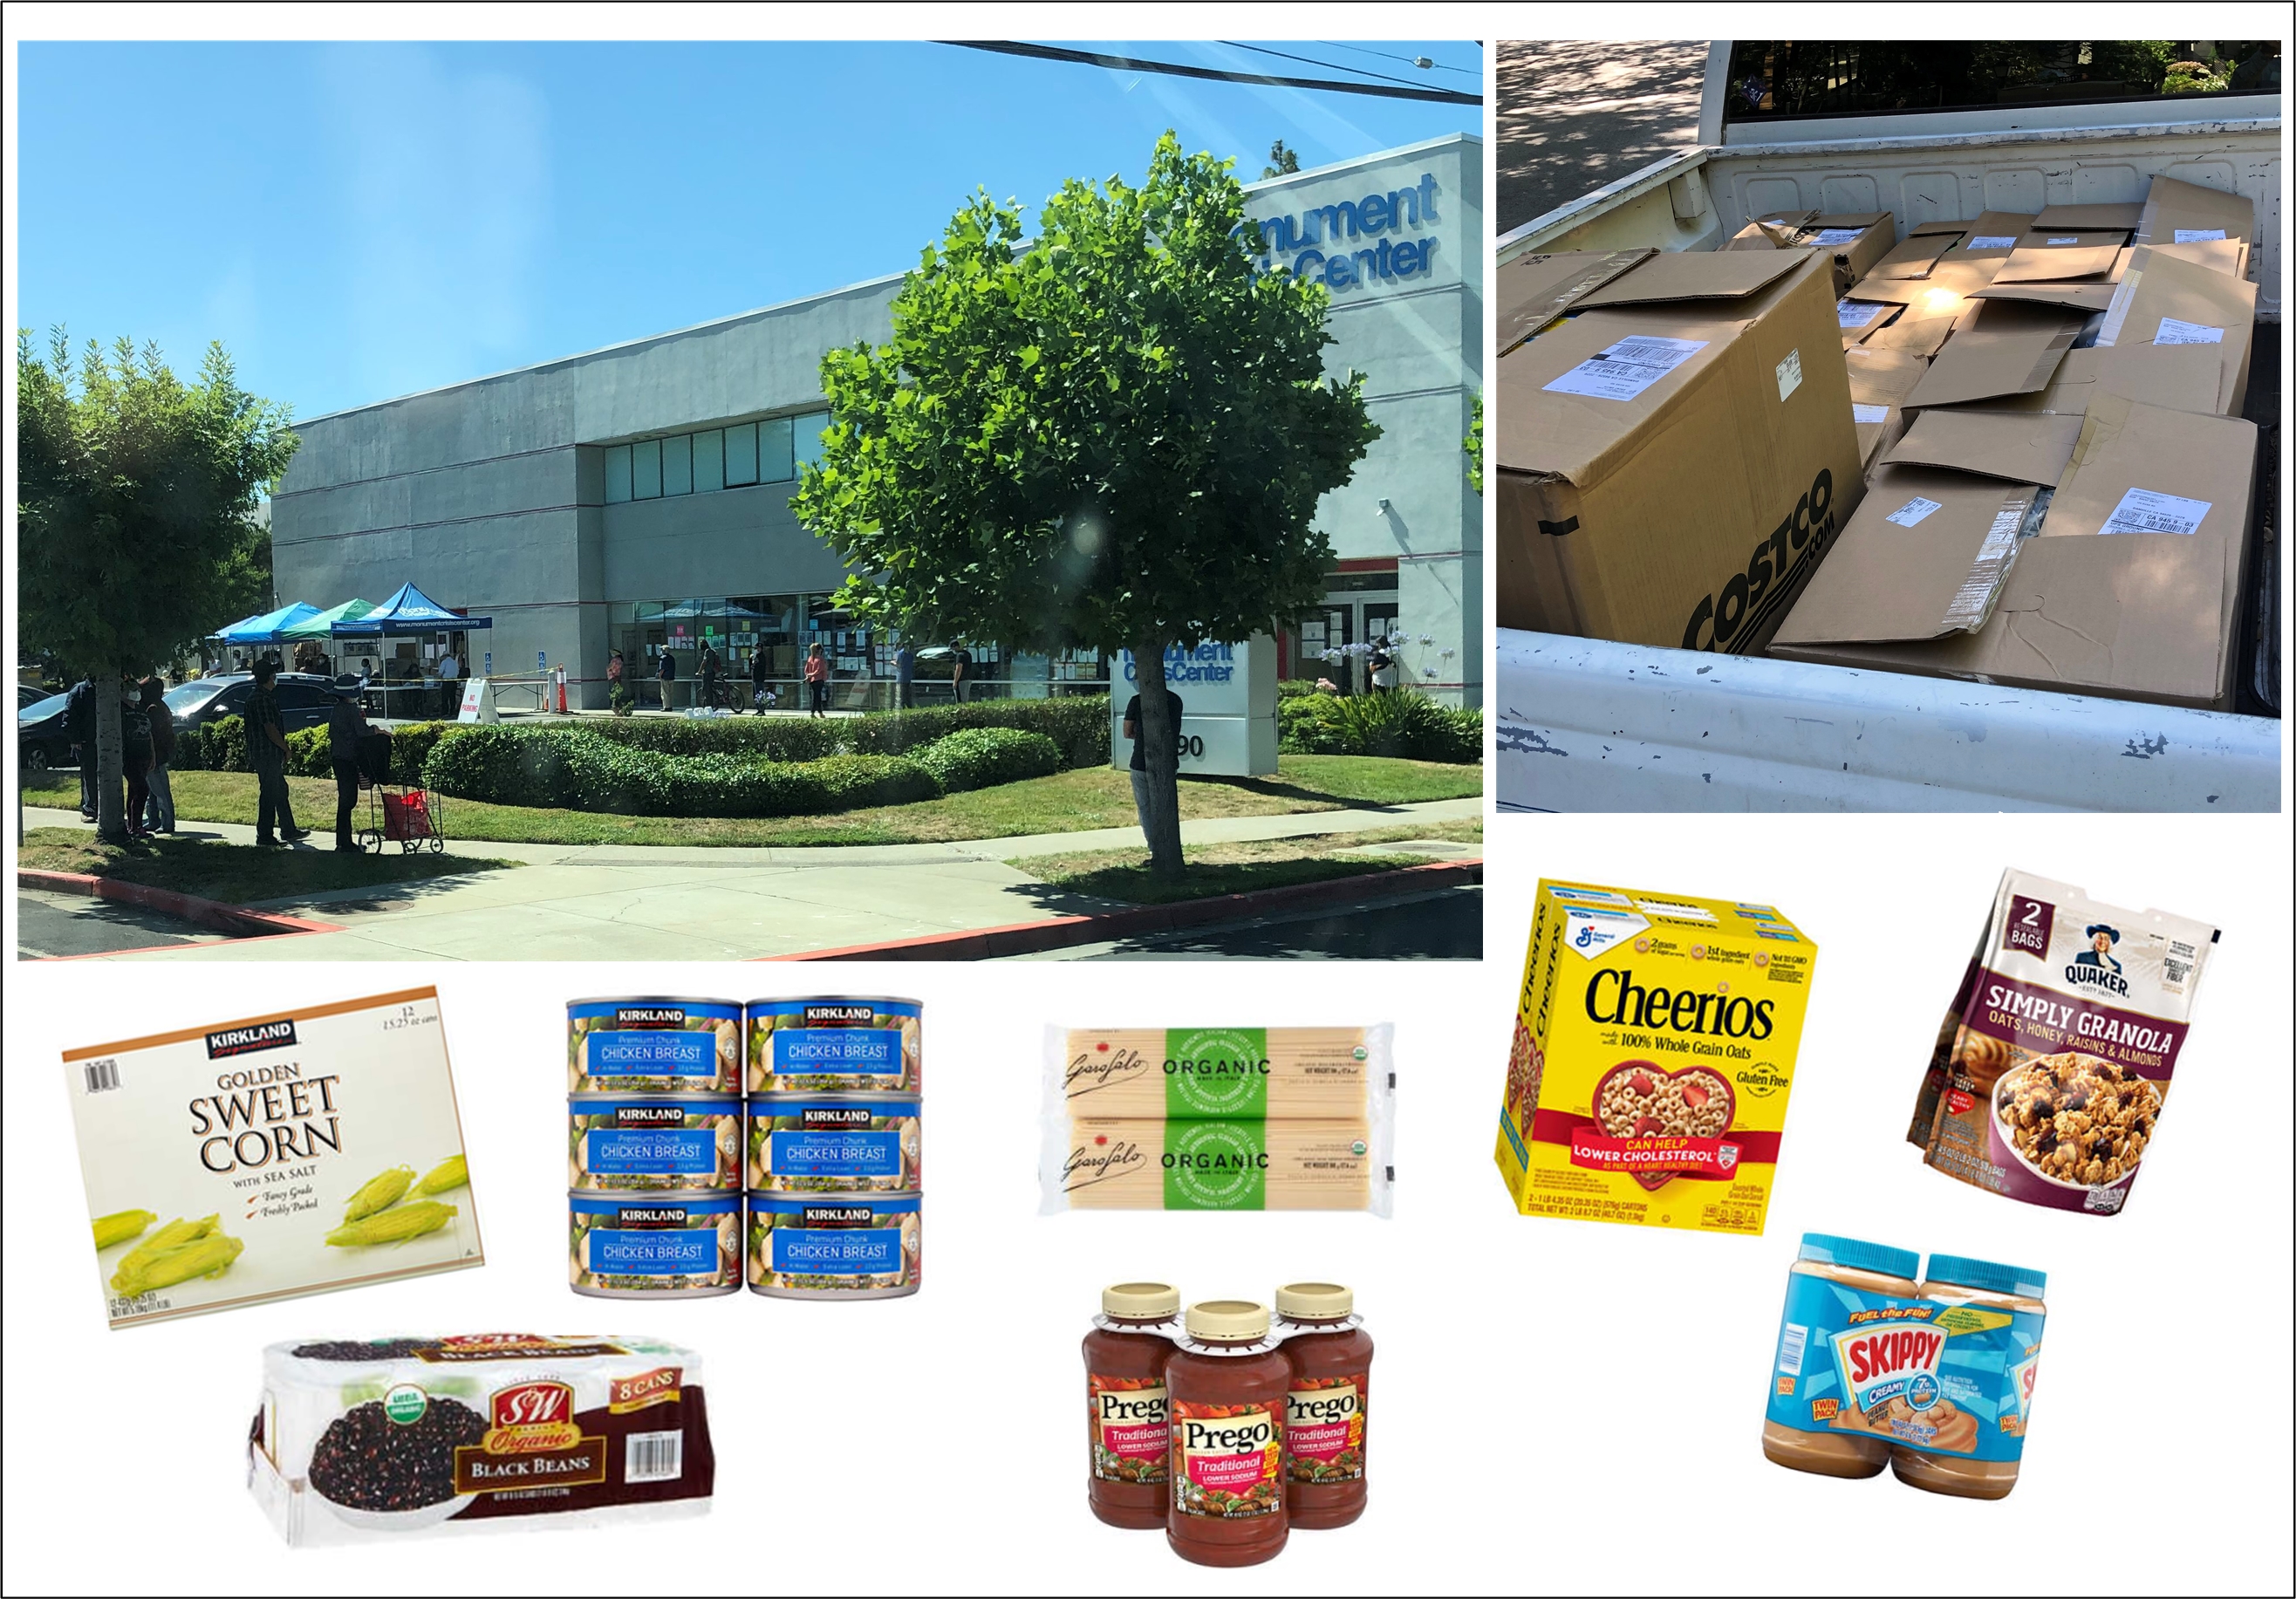 Delivering food to help the Monument Crisis Center in Concord, California